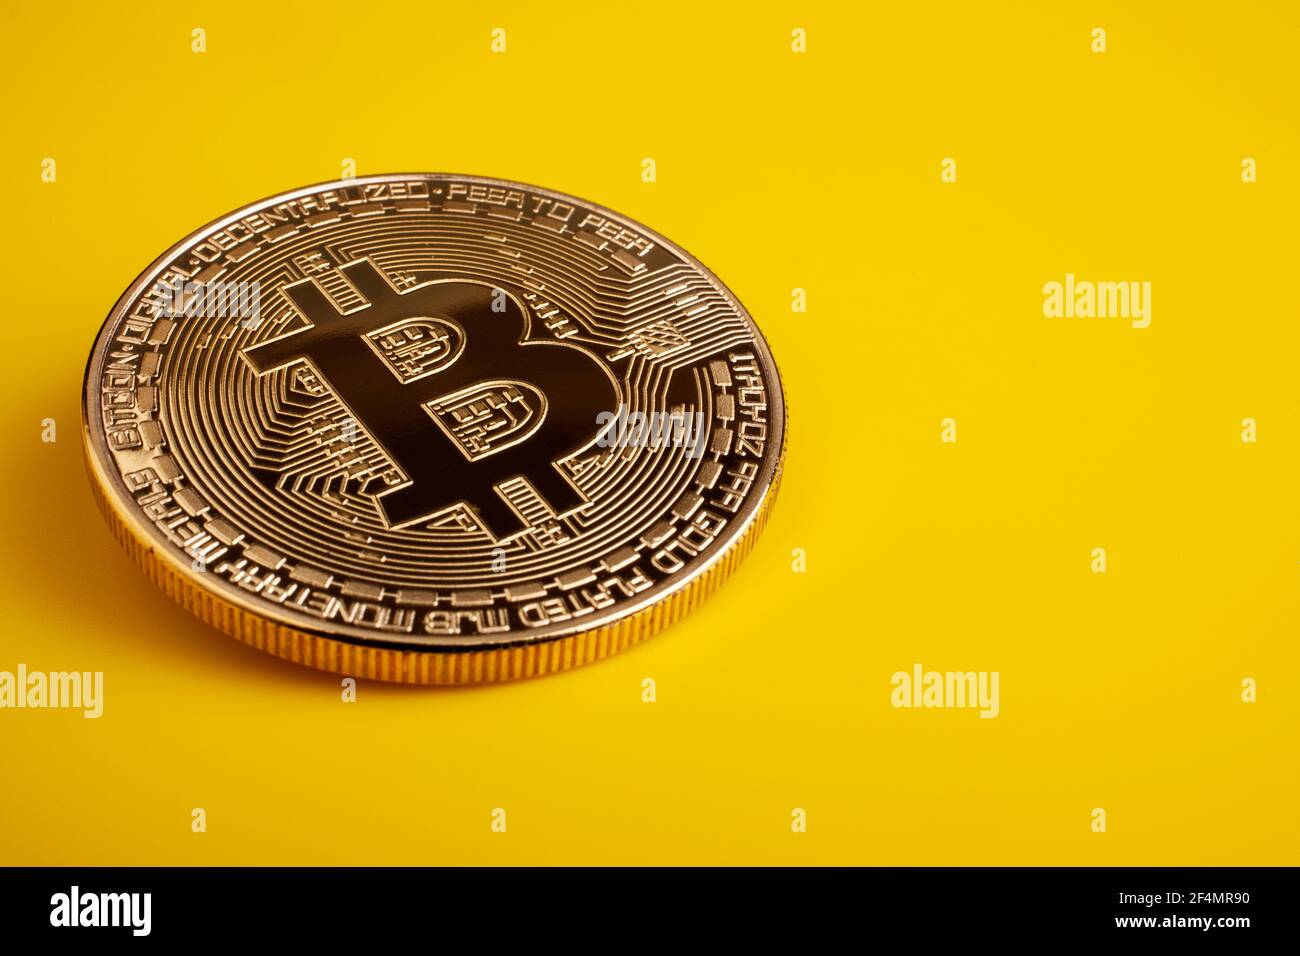 Golden bitcoin on a yellow background Stock Photo